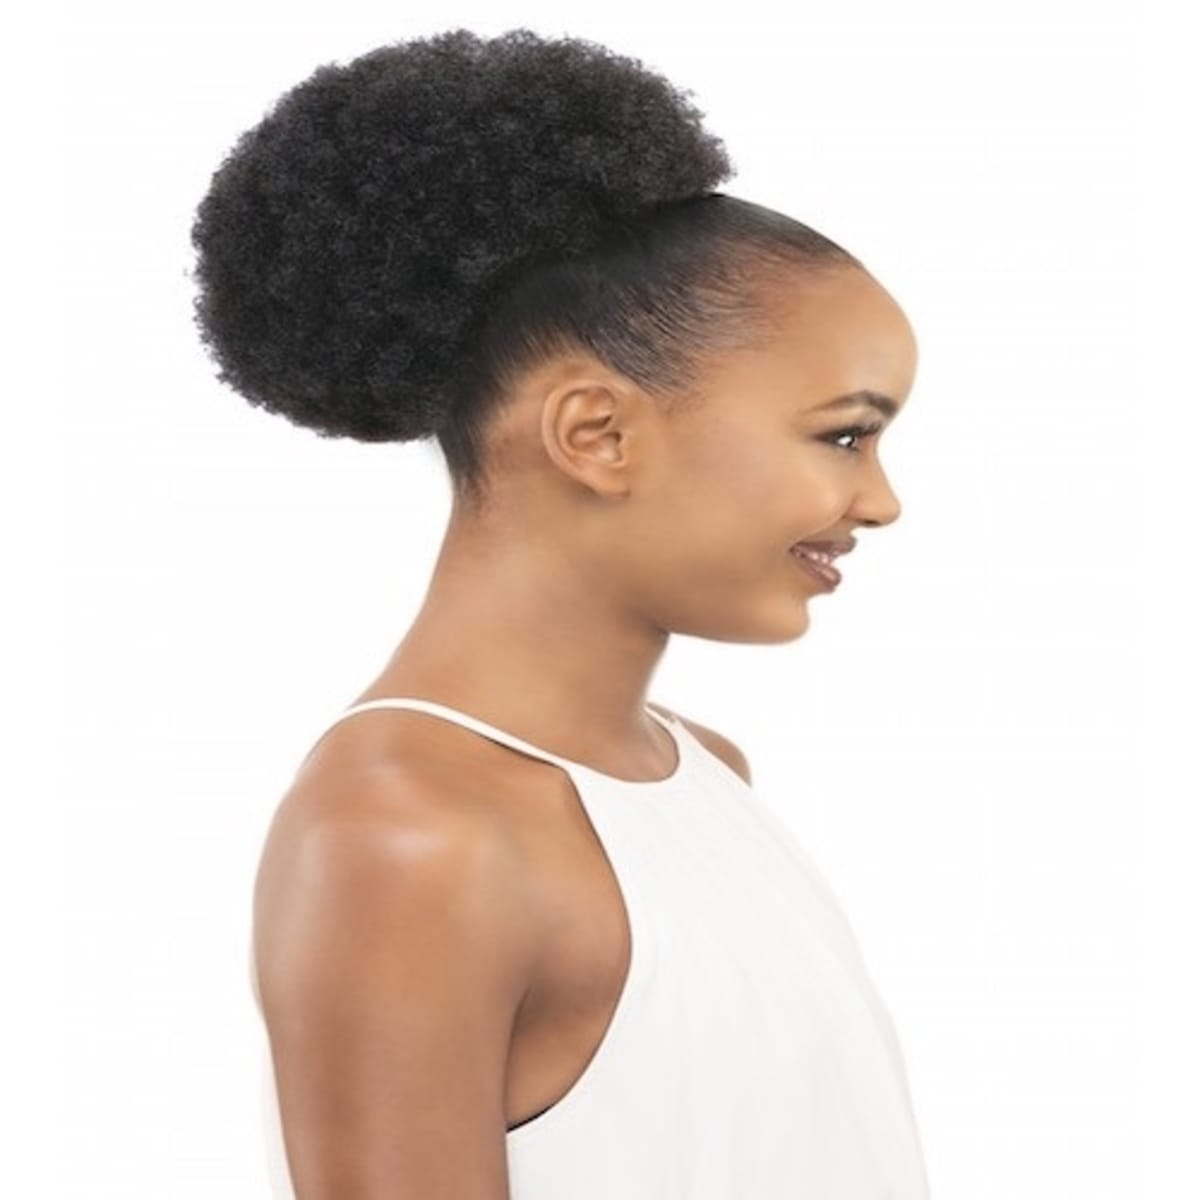 Afro Puff Drawstring Ponytail Synthetic Short Afro Kinkys Curly Afro Bun  Extension Hairpieces Updo Hair Extensions with Two Clips Black1   Walmart Canada